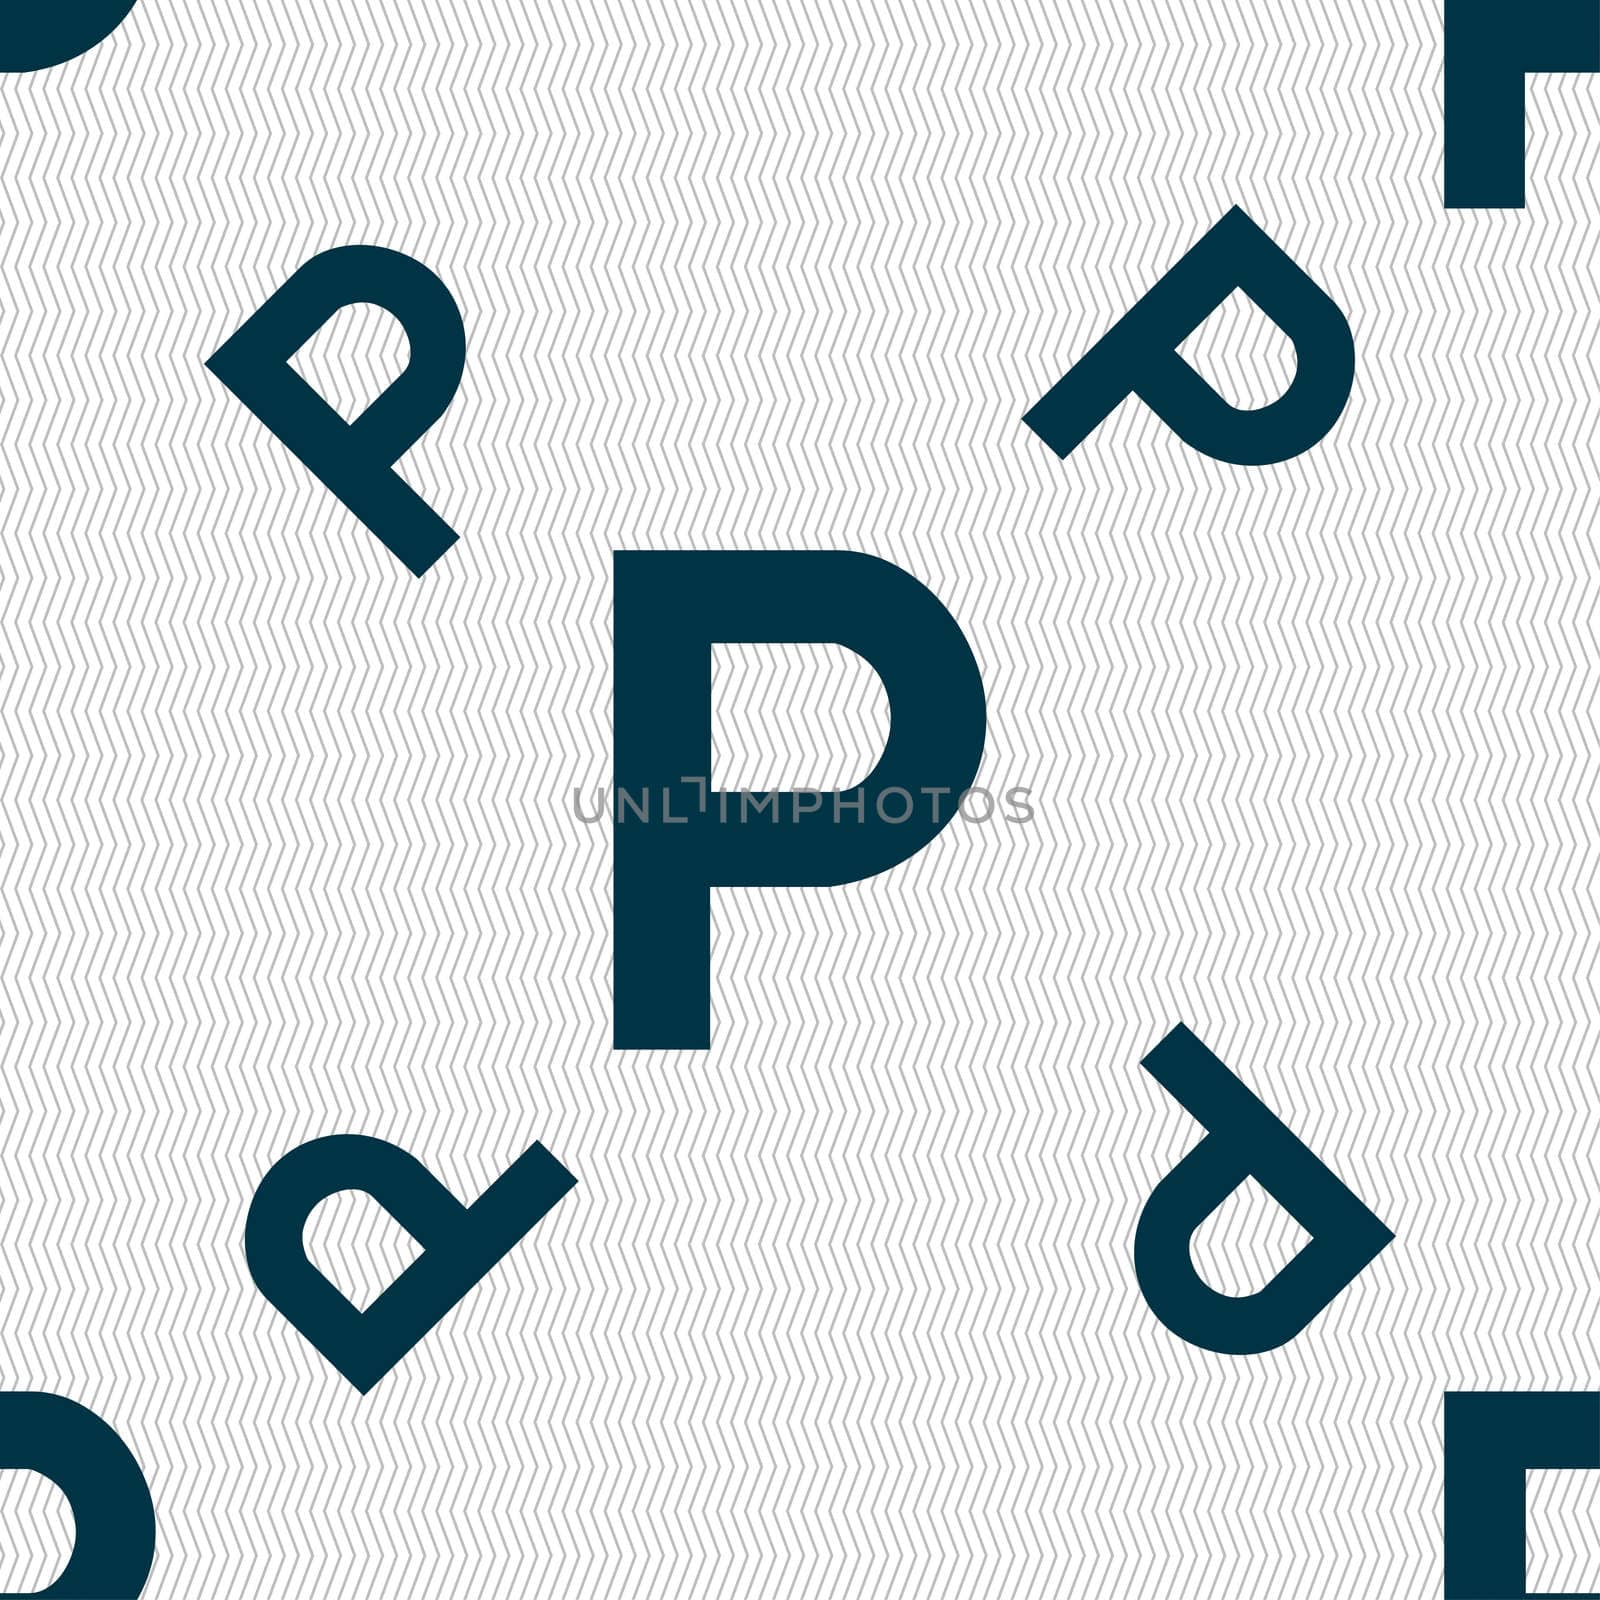 parking icon sign. Seamless pattern with geometric texture. illustration